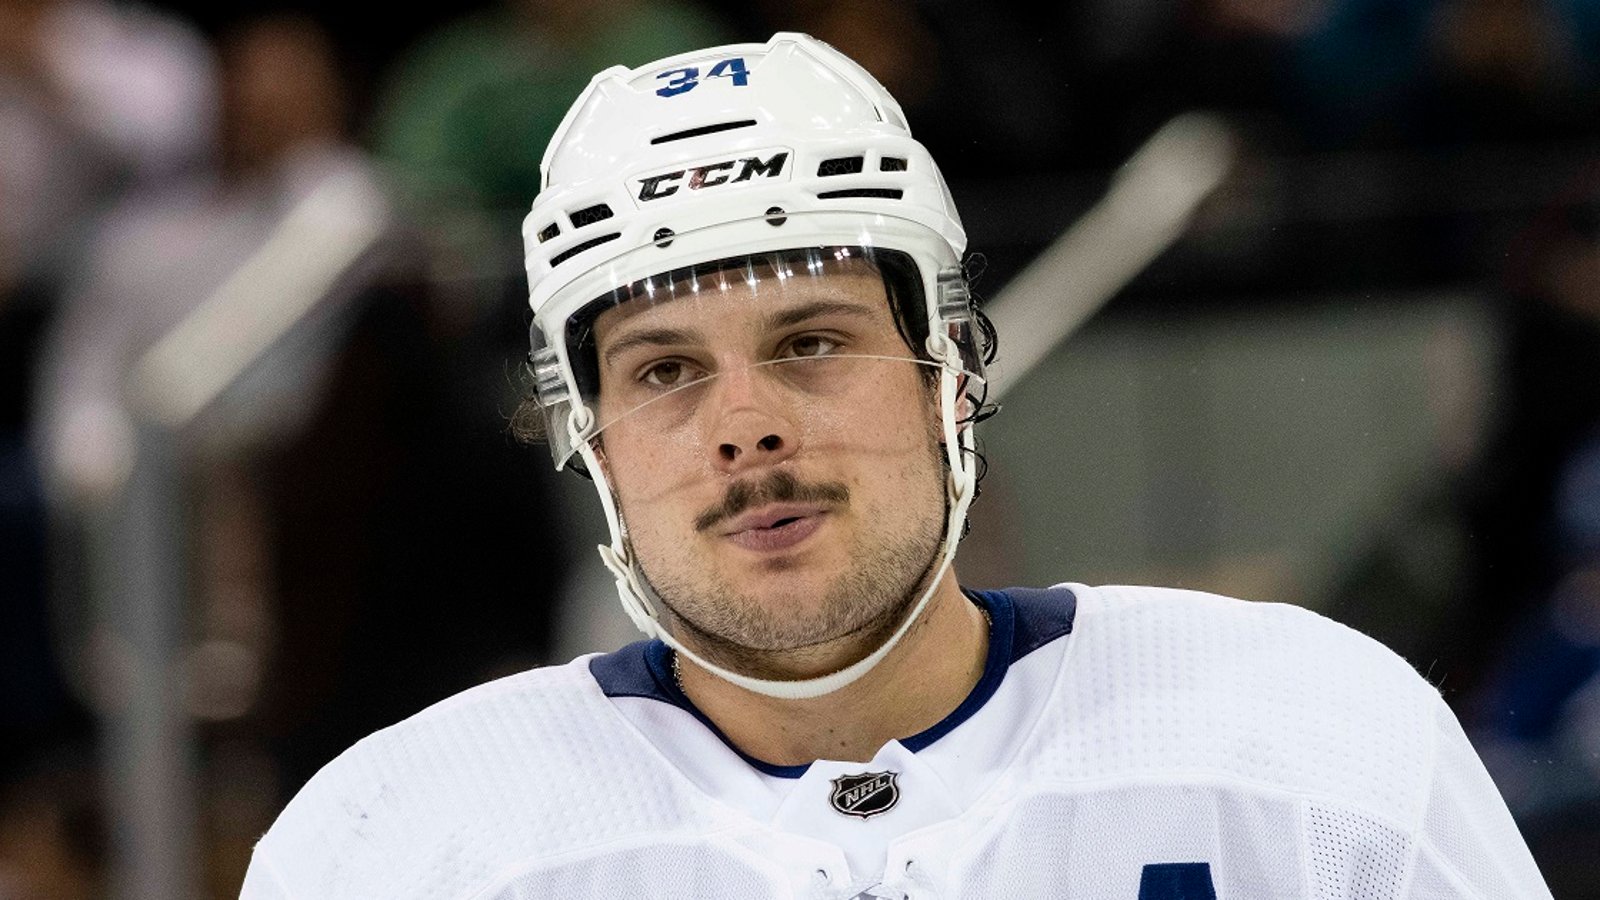 Auston Matthews compares one of his Maple Leafs' teammates to Sidney Crosby.